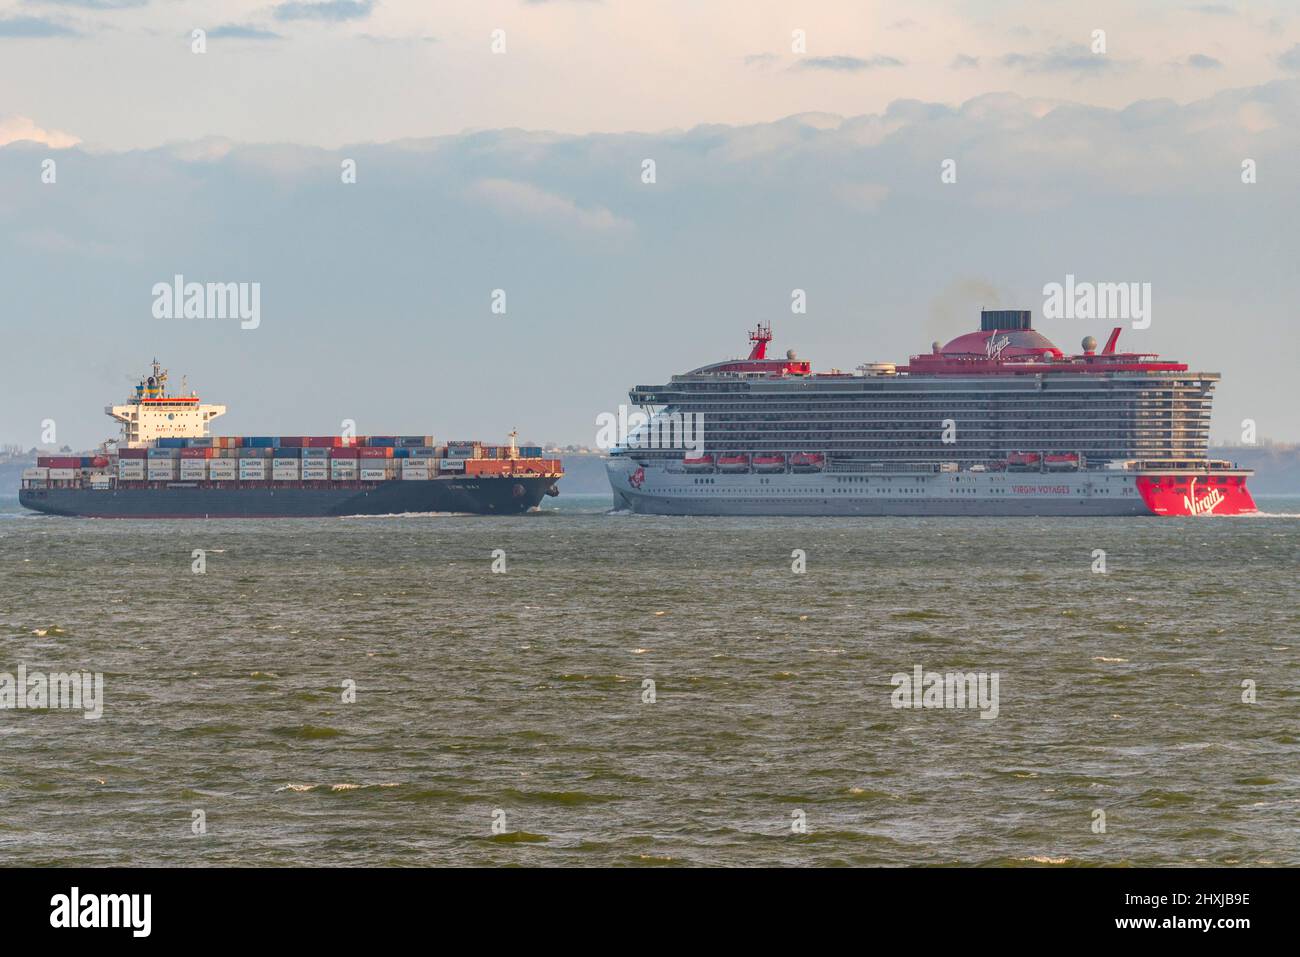 Valiant Lady, new cruise ship for Virgin Voyages seen heading out to sea on Thames Estuary after launch party at Tilbury. Passing container ship Stock Photo